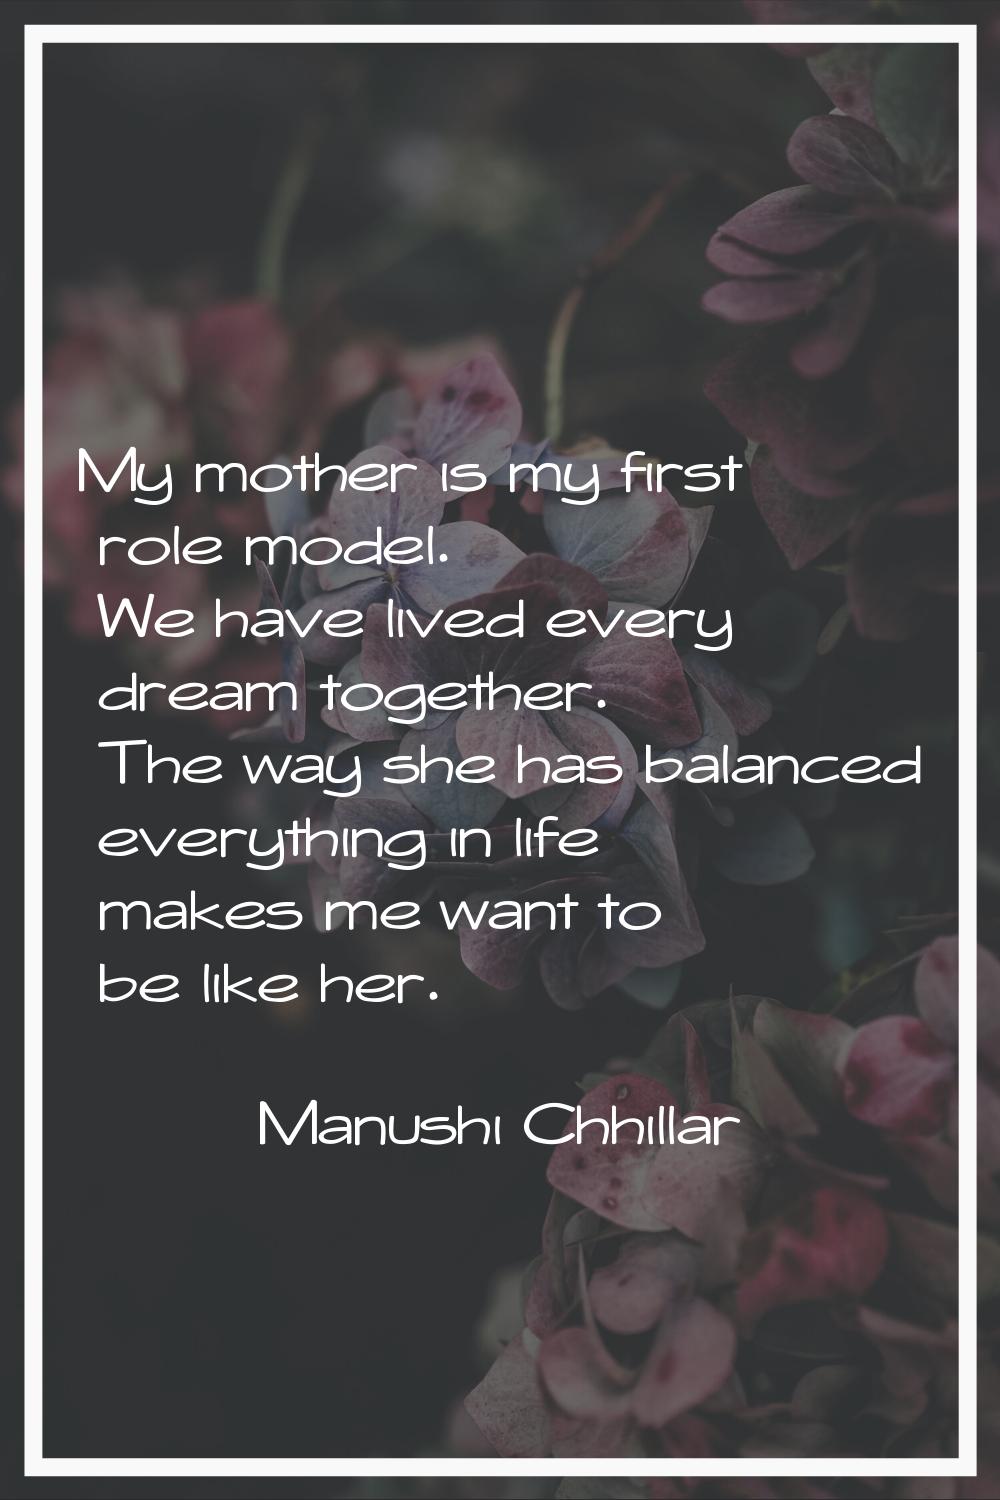 My mother is my first role model. We have lived every dream together. The way she has balanced ever